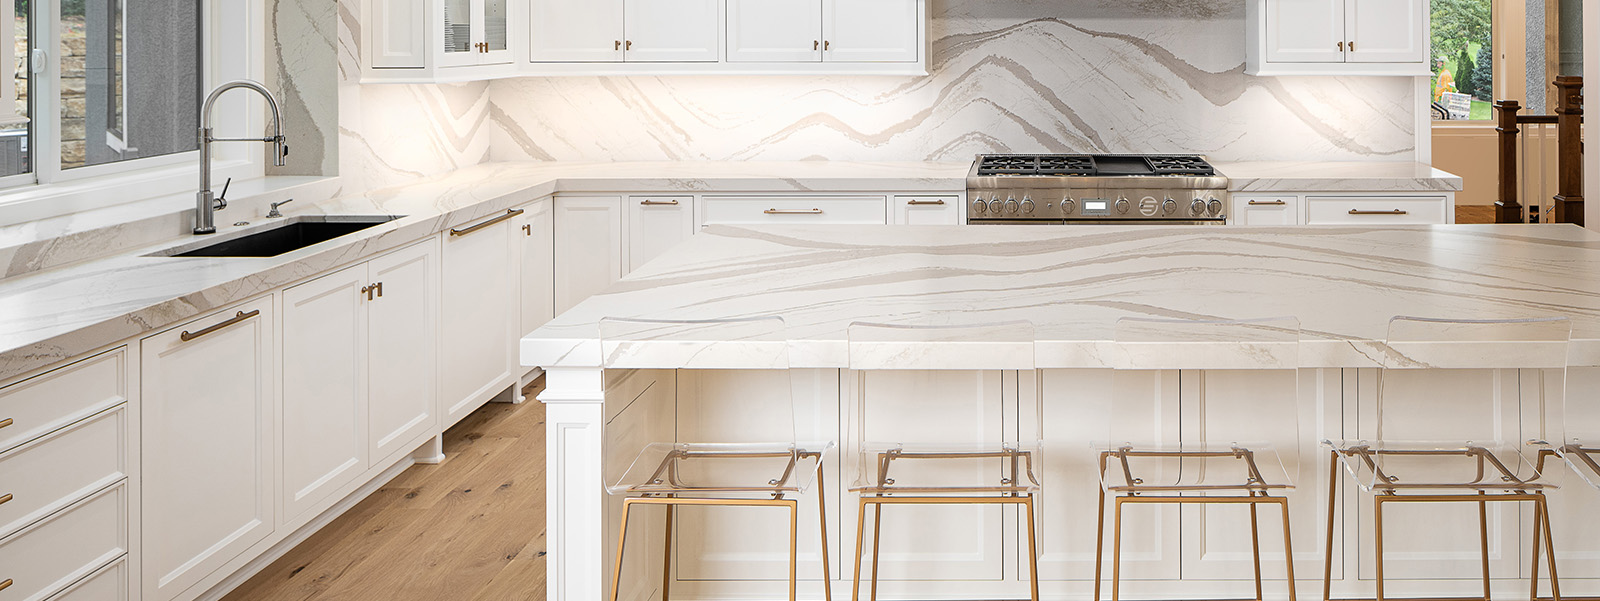 Countertops And The Truth About Seams, How To Separate Granite Countertop Seamless